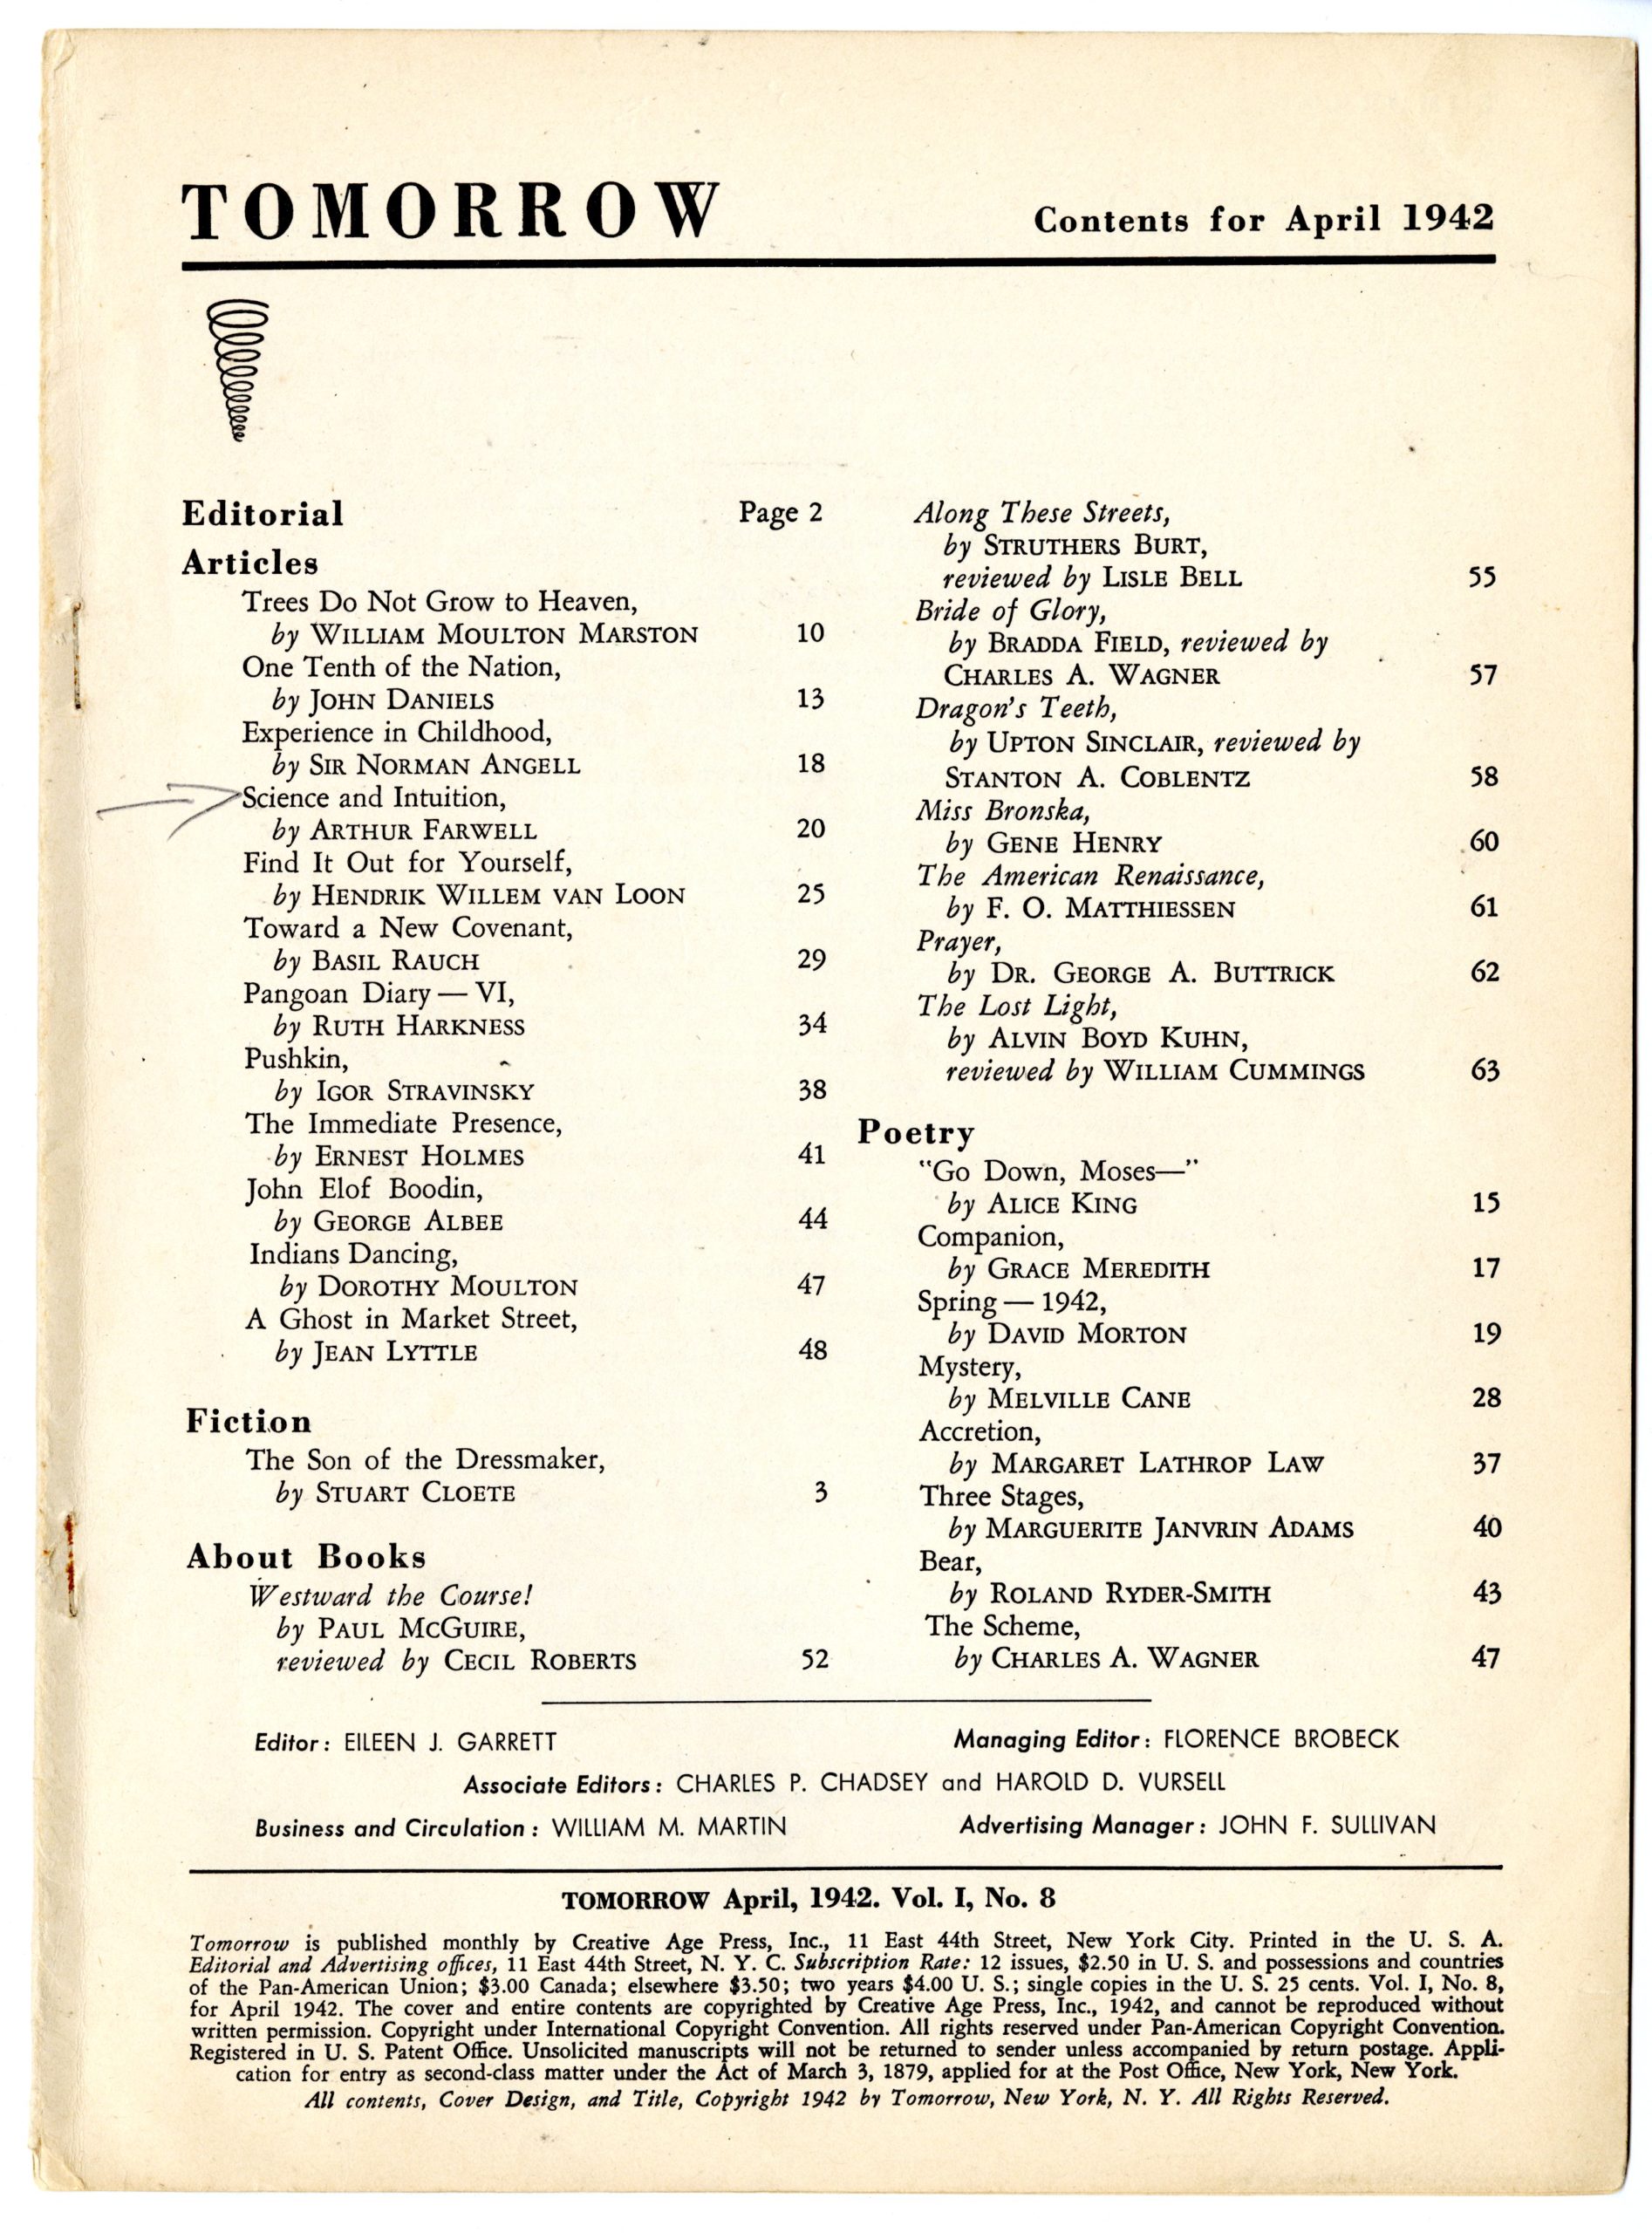 Tomorrow magazine, April 1942 issue table of contents.